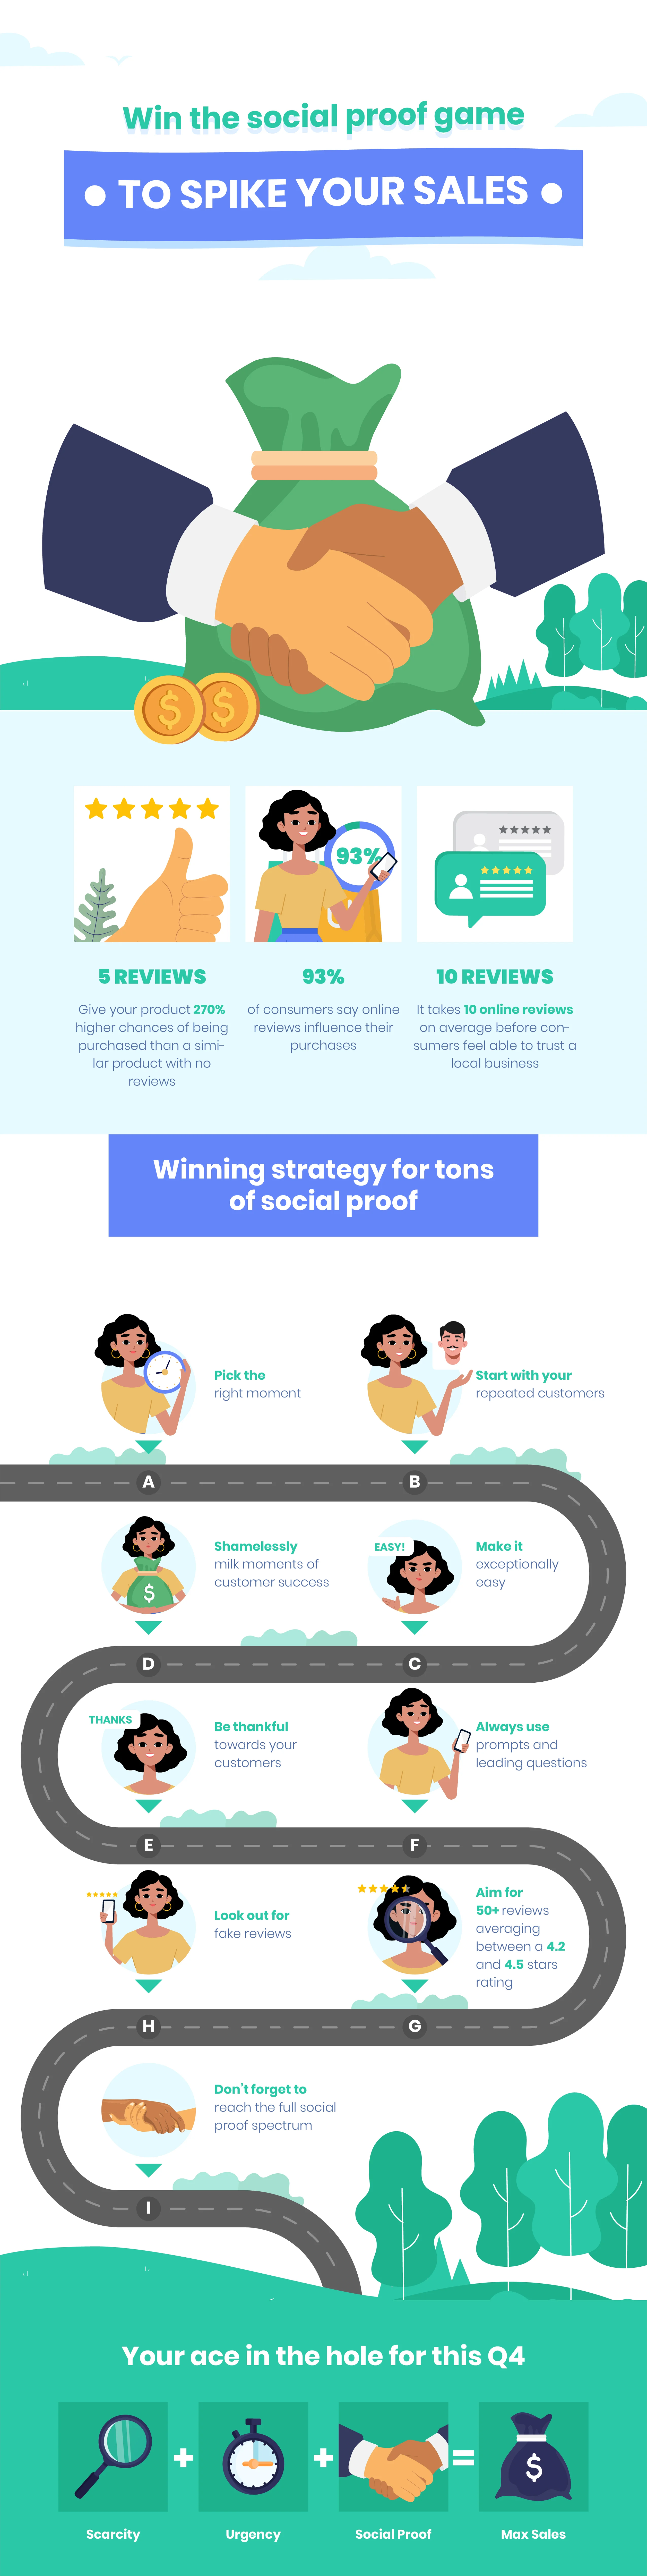 9 ways to use reviews to smash all sales records